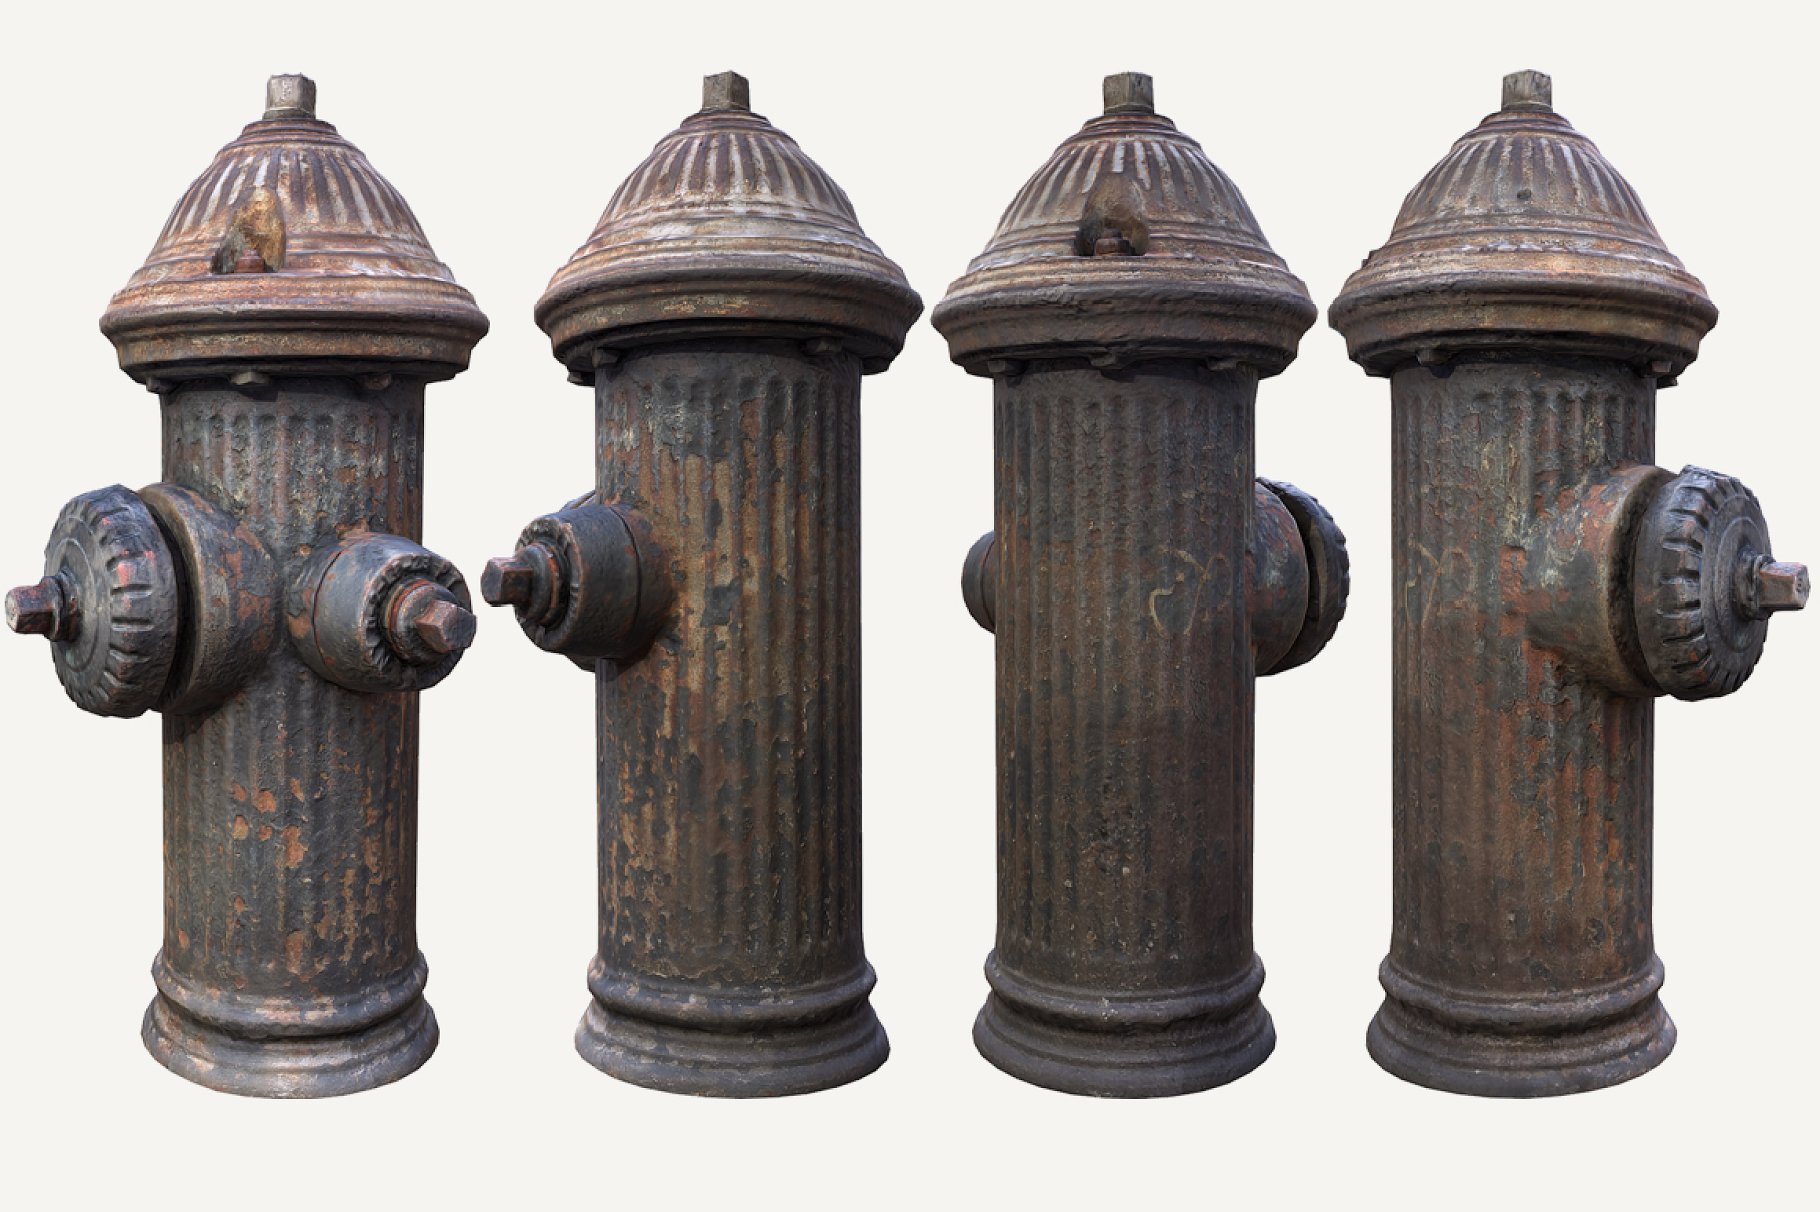 4 fire hydrant lowpoly 3d models on a white background.